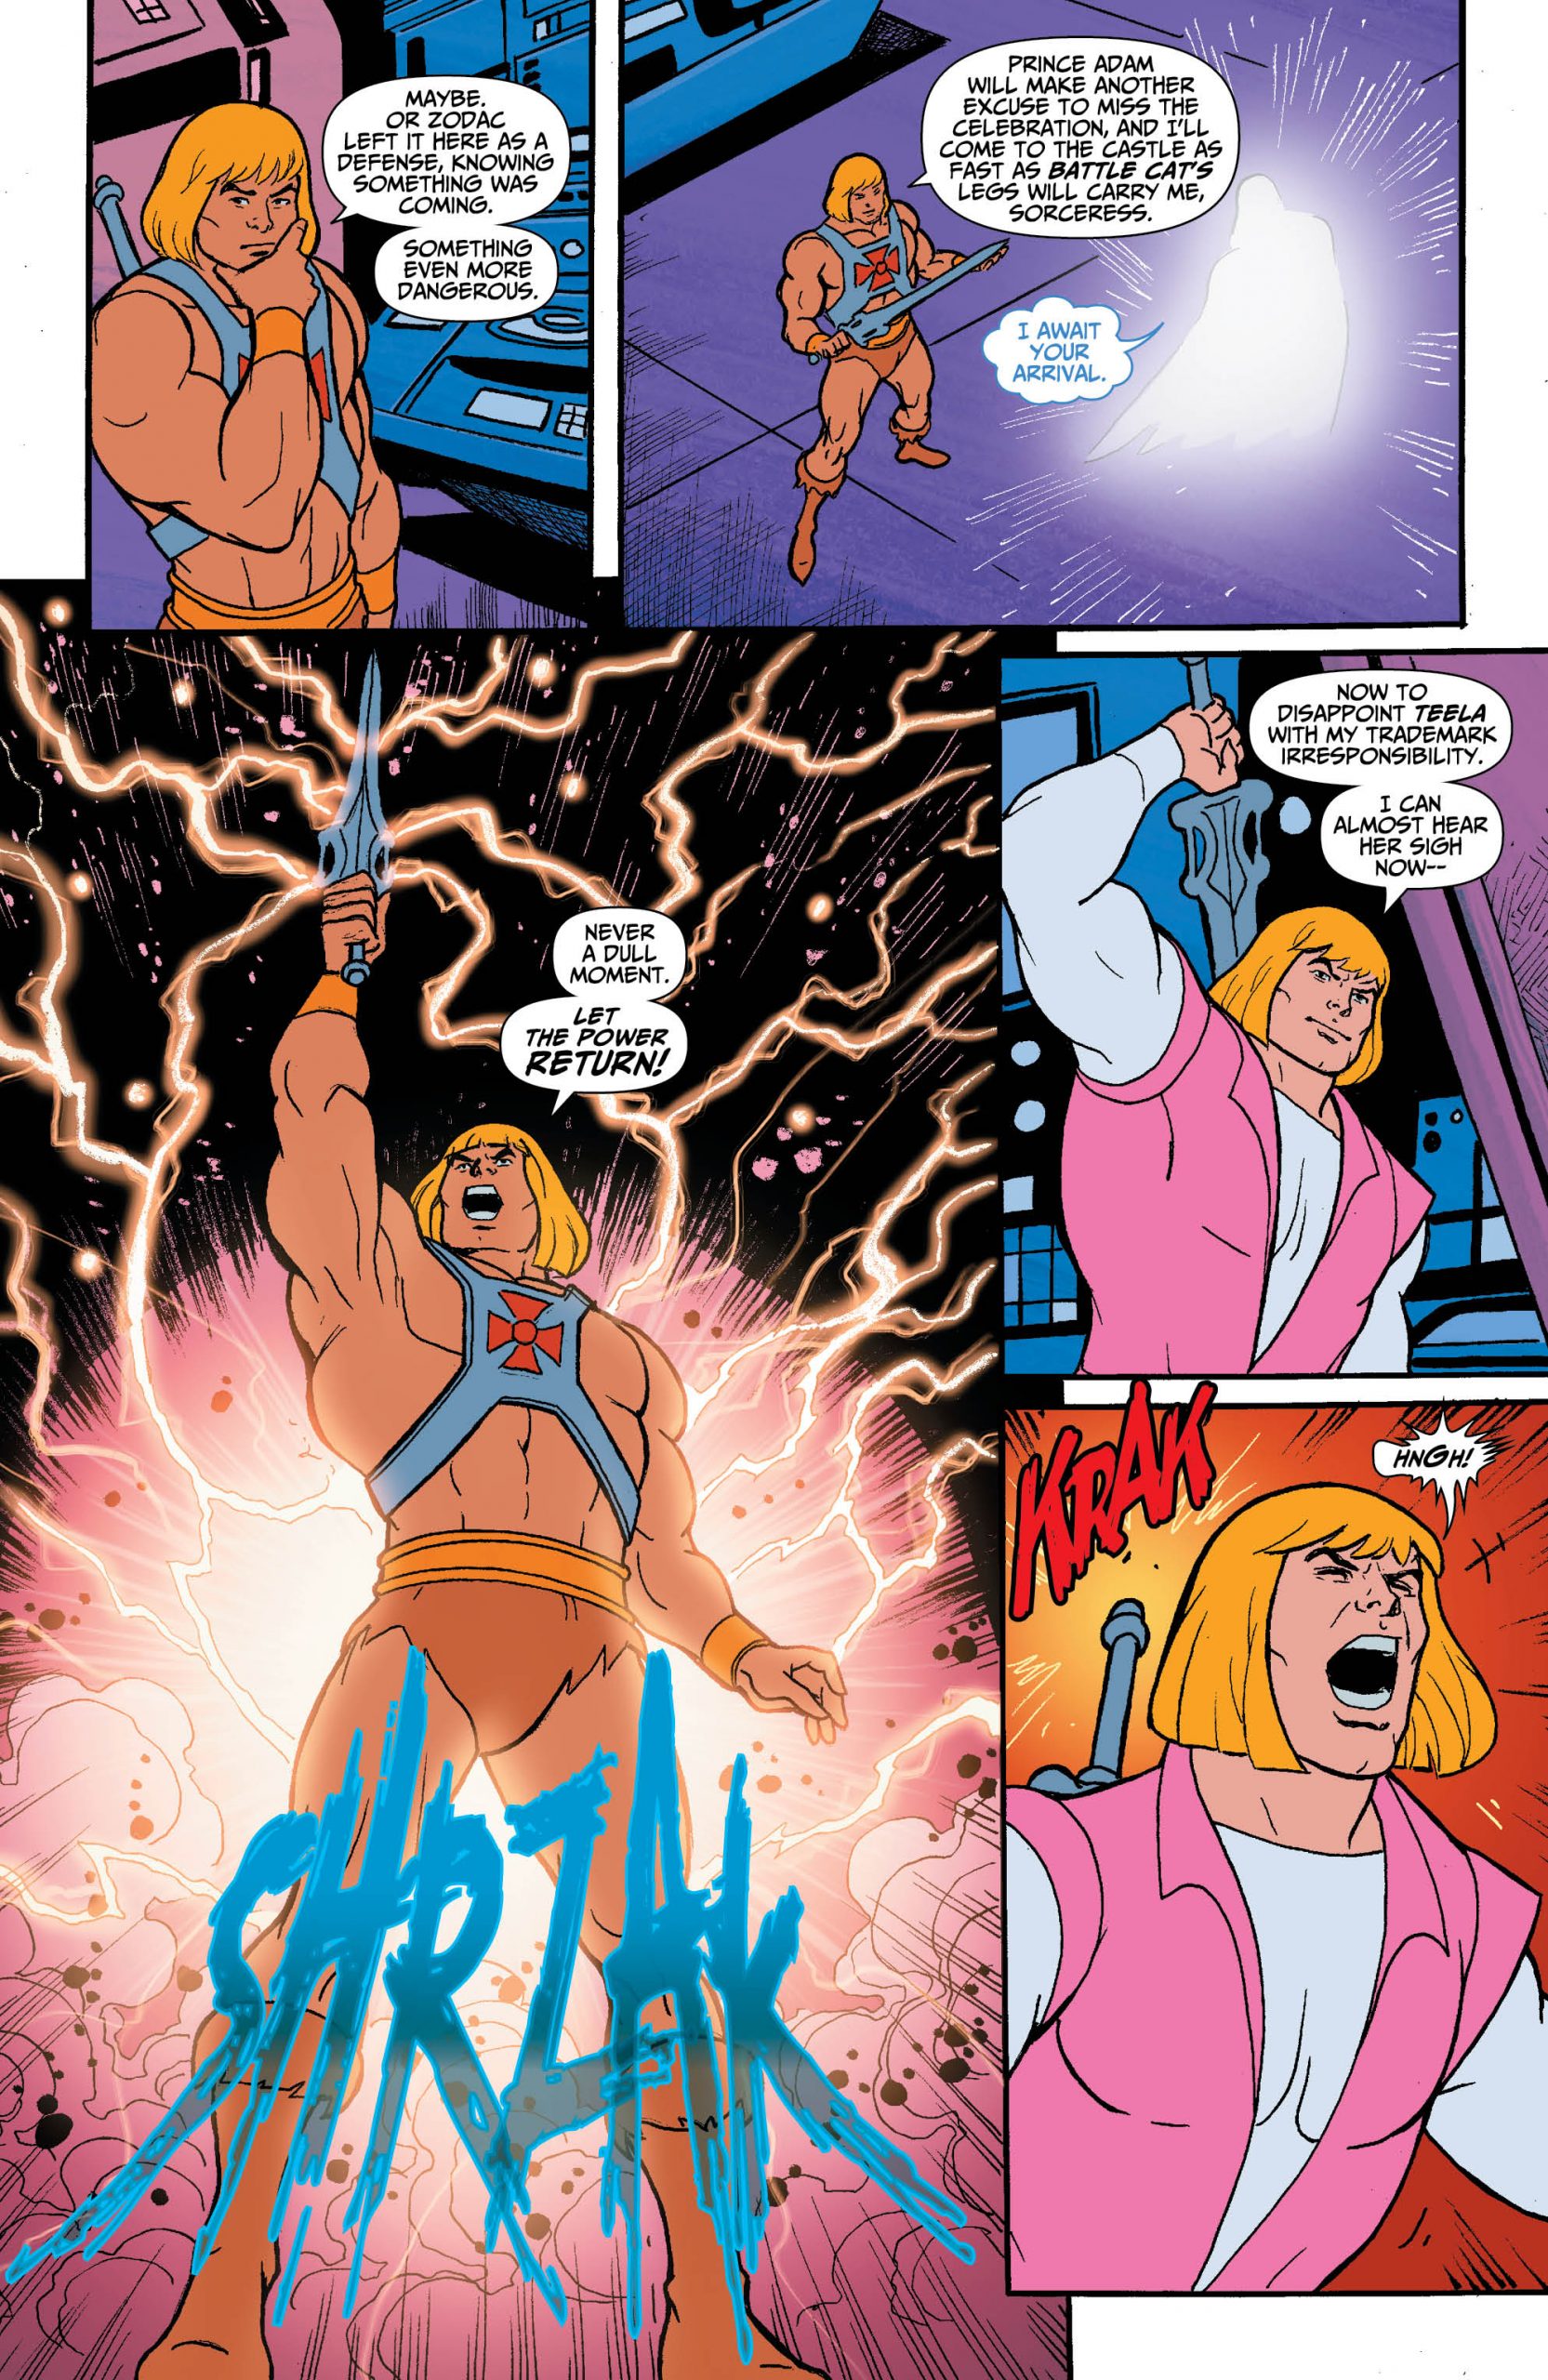 He-Man and the Masters of the Mulitverse #4